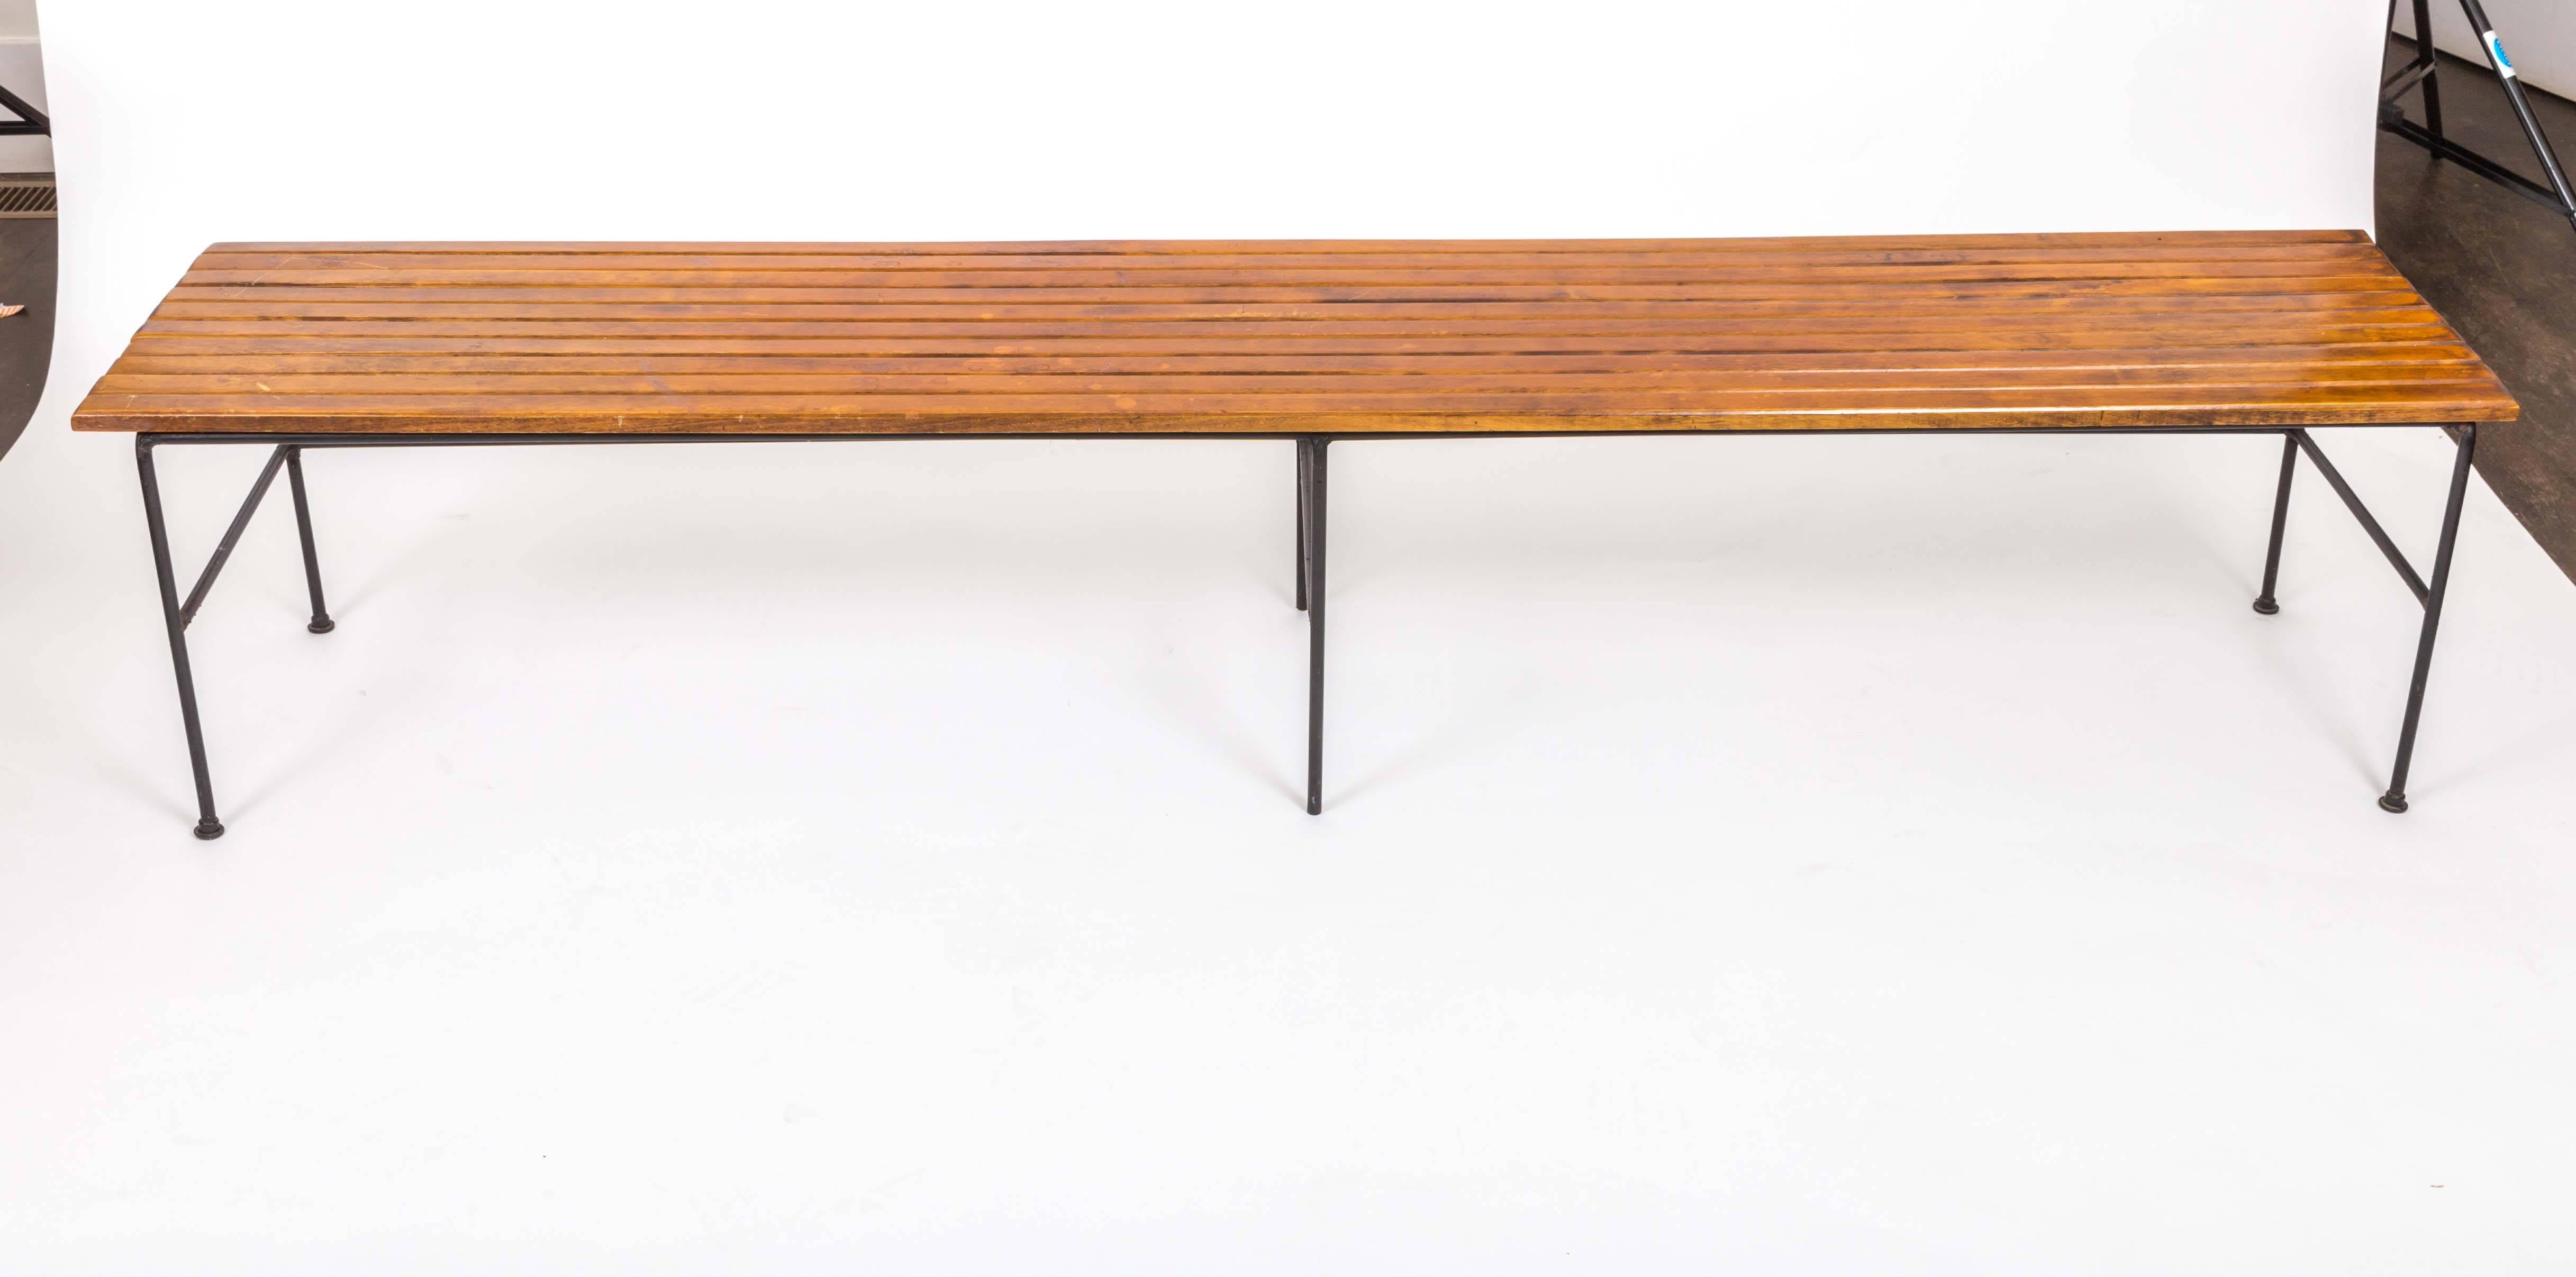 Mid-20th Century Wooden Slatted Bench by Arthur Umanoff